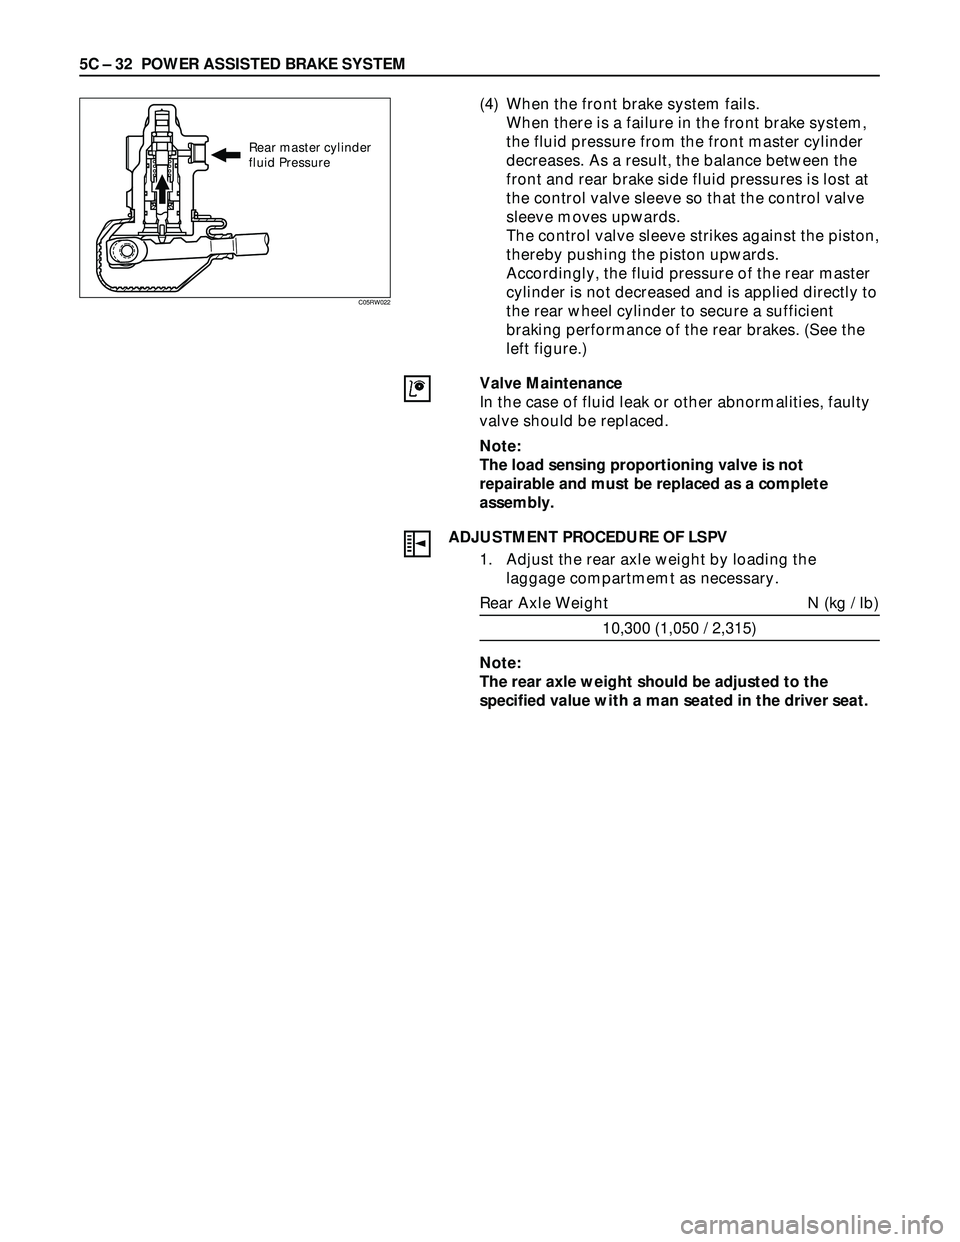 ISUZU TROOPER 1998  Service Repair Manual 5C – 32 POWER ASSISTED BRAKE SYSTEM
(4) When the front brake system fails.
When there is a failure in the front brake system,
the fluid pressure from the front master cylinder
decreases. As a result